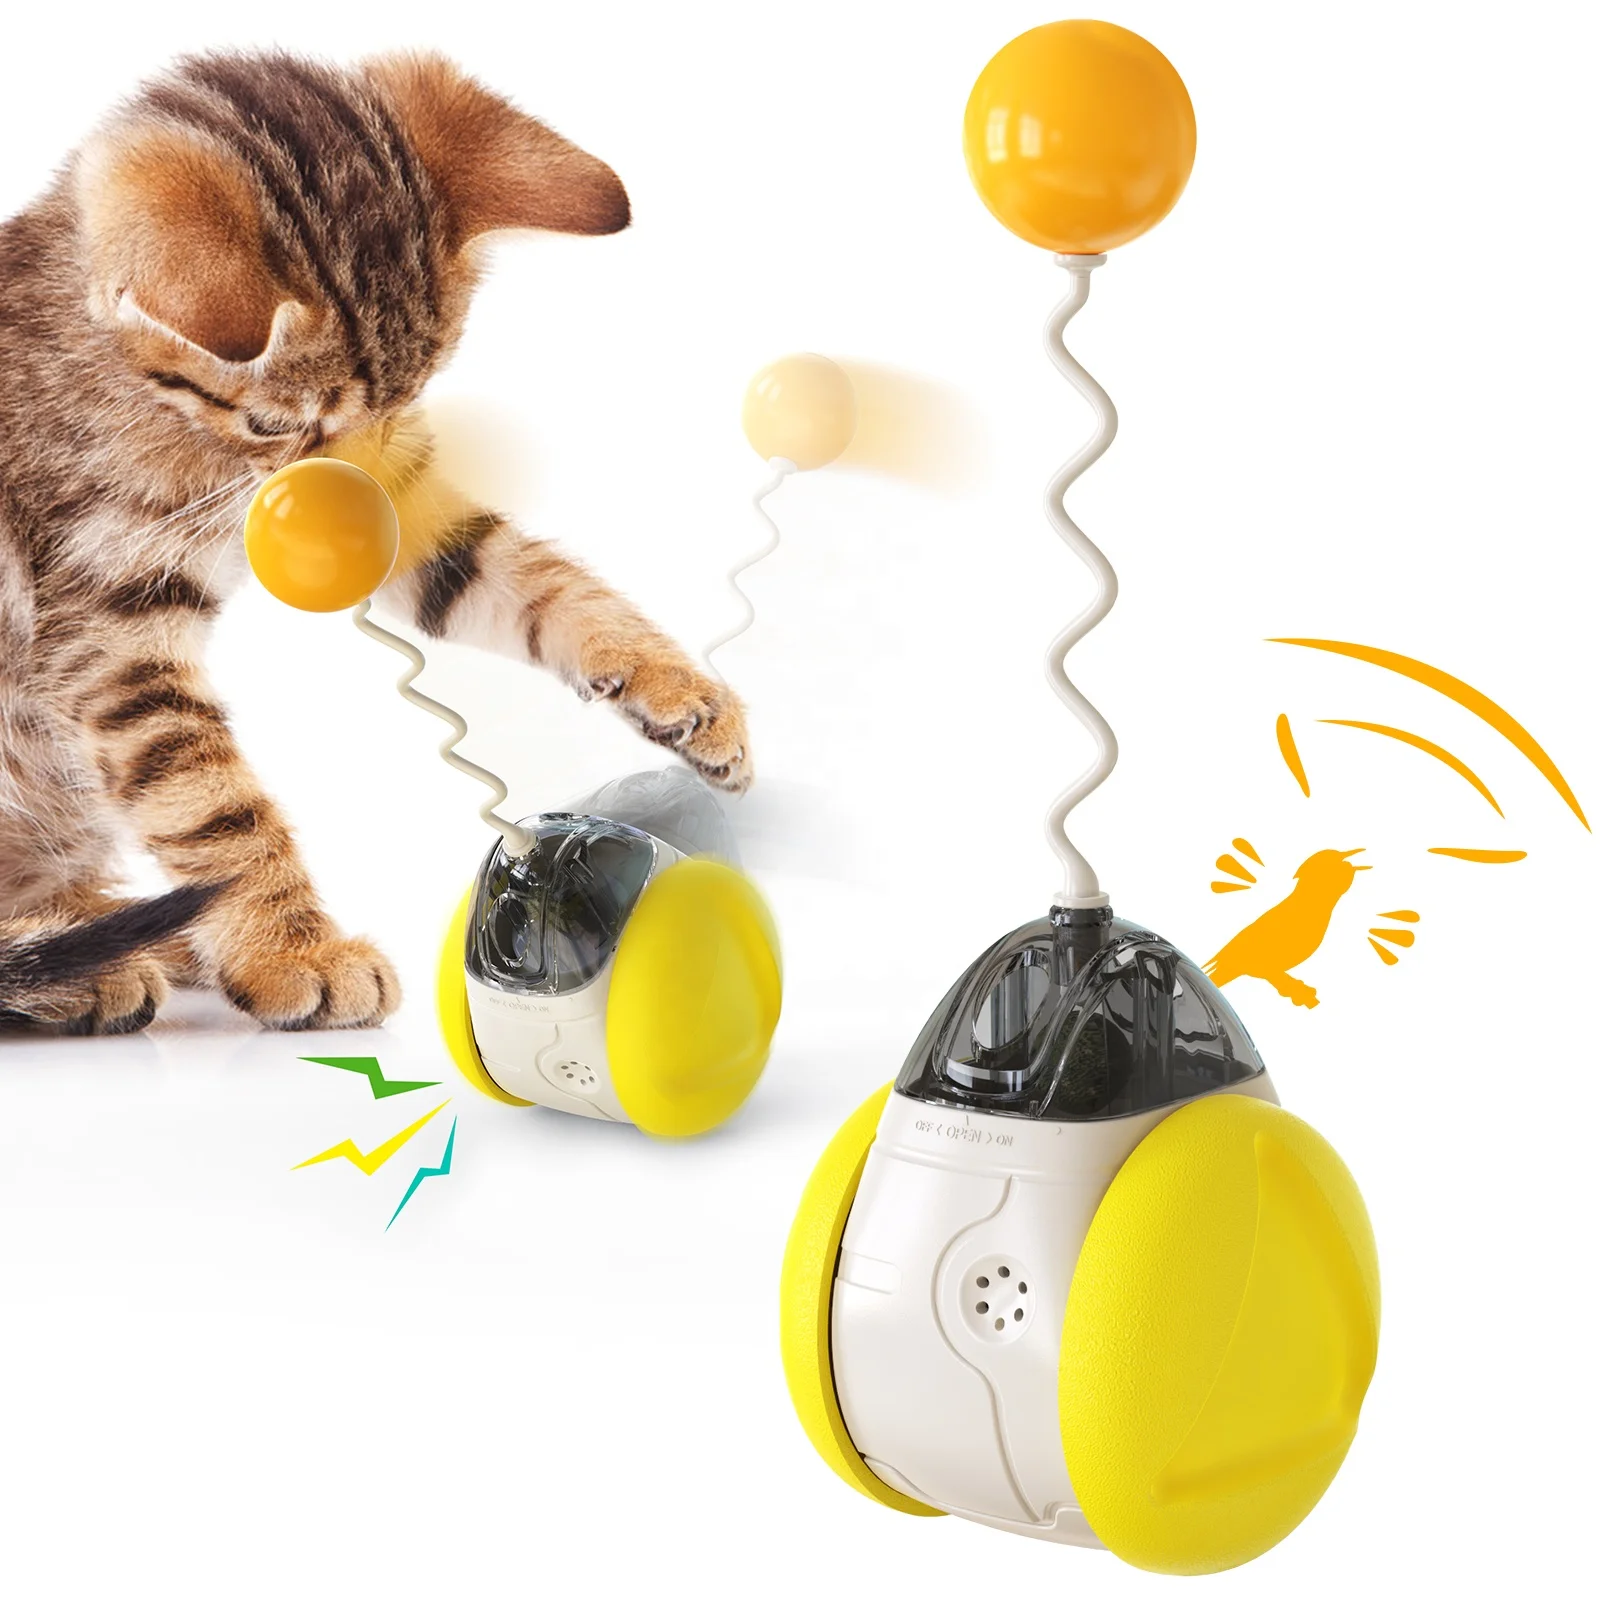 

Secure pet supplies squeaky toy balance tumbler chaser tracting squeaky rotatable running funny cat stick teaser wand ball, Blue yellow green pink